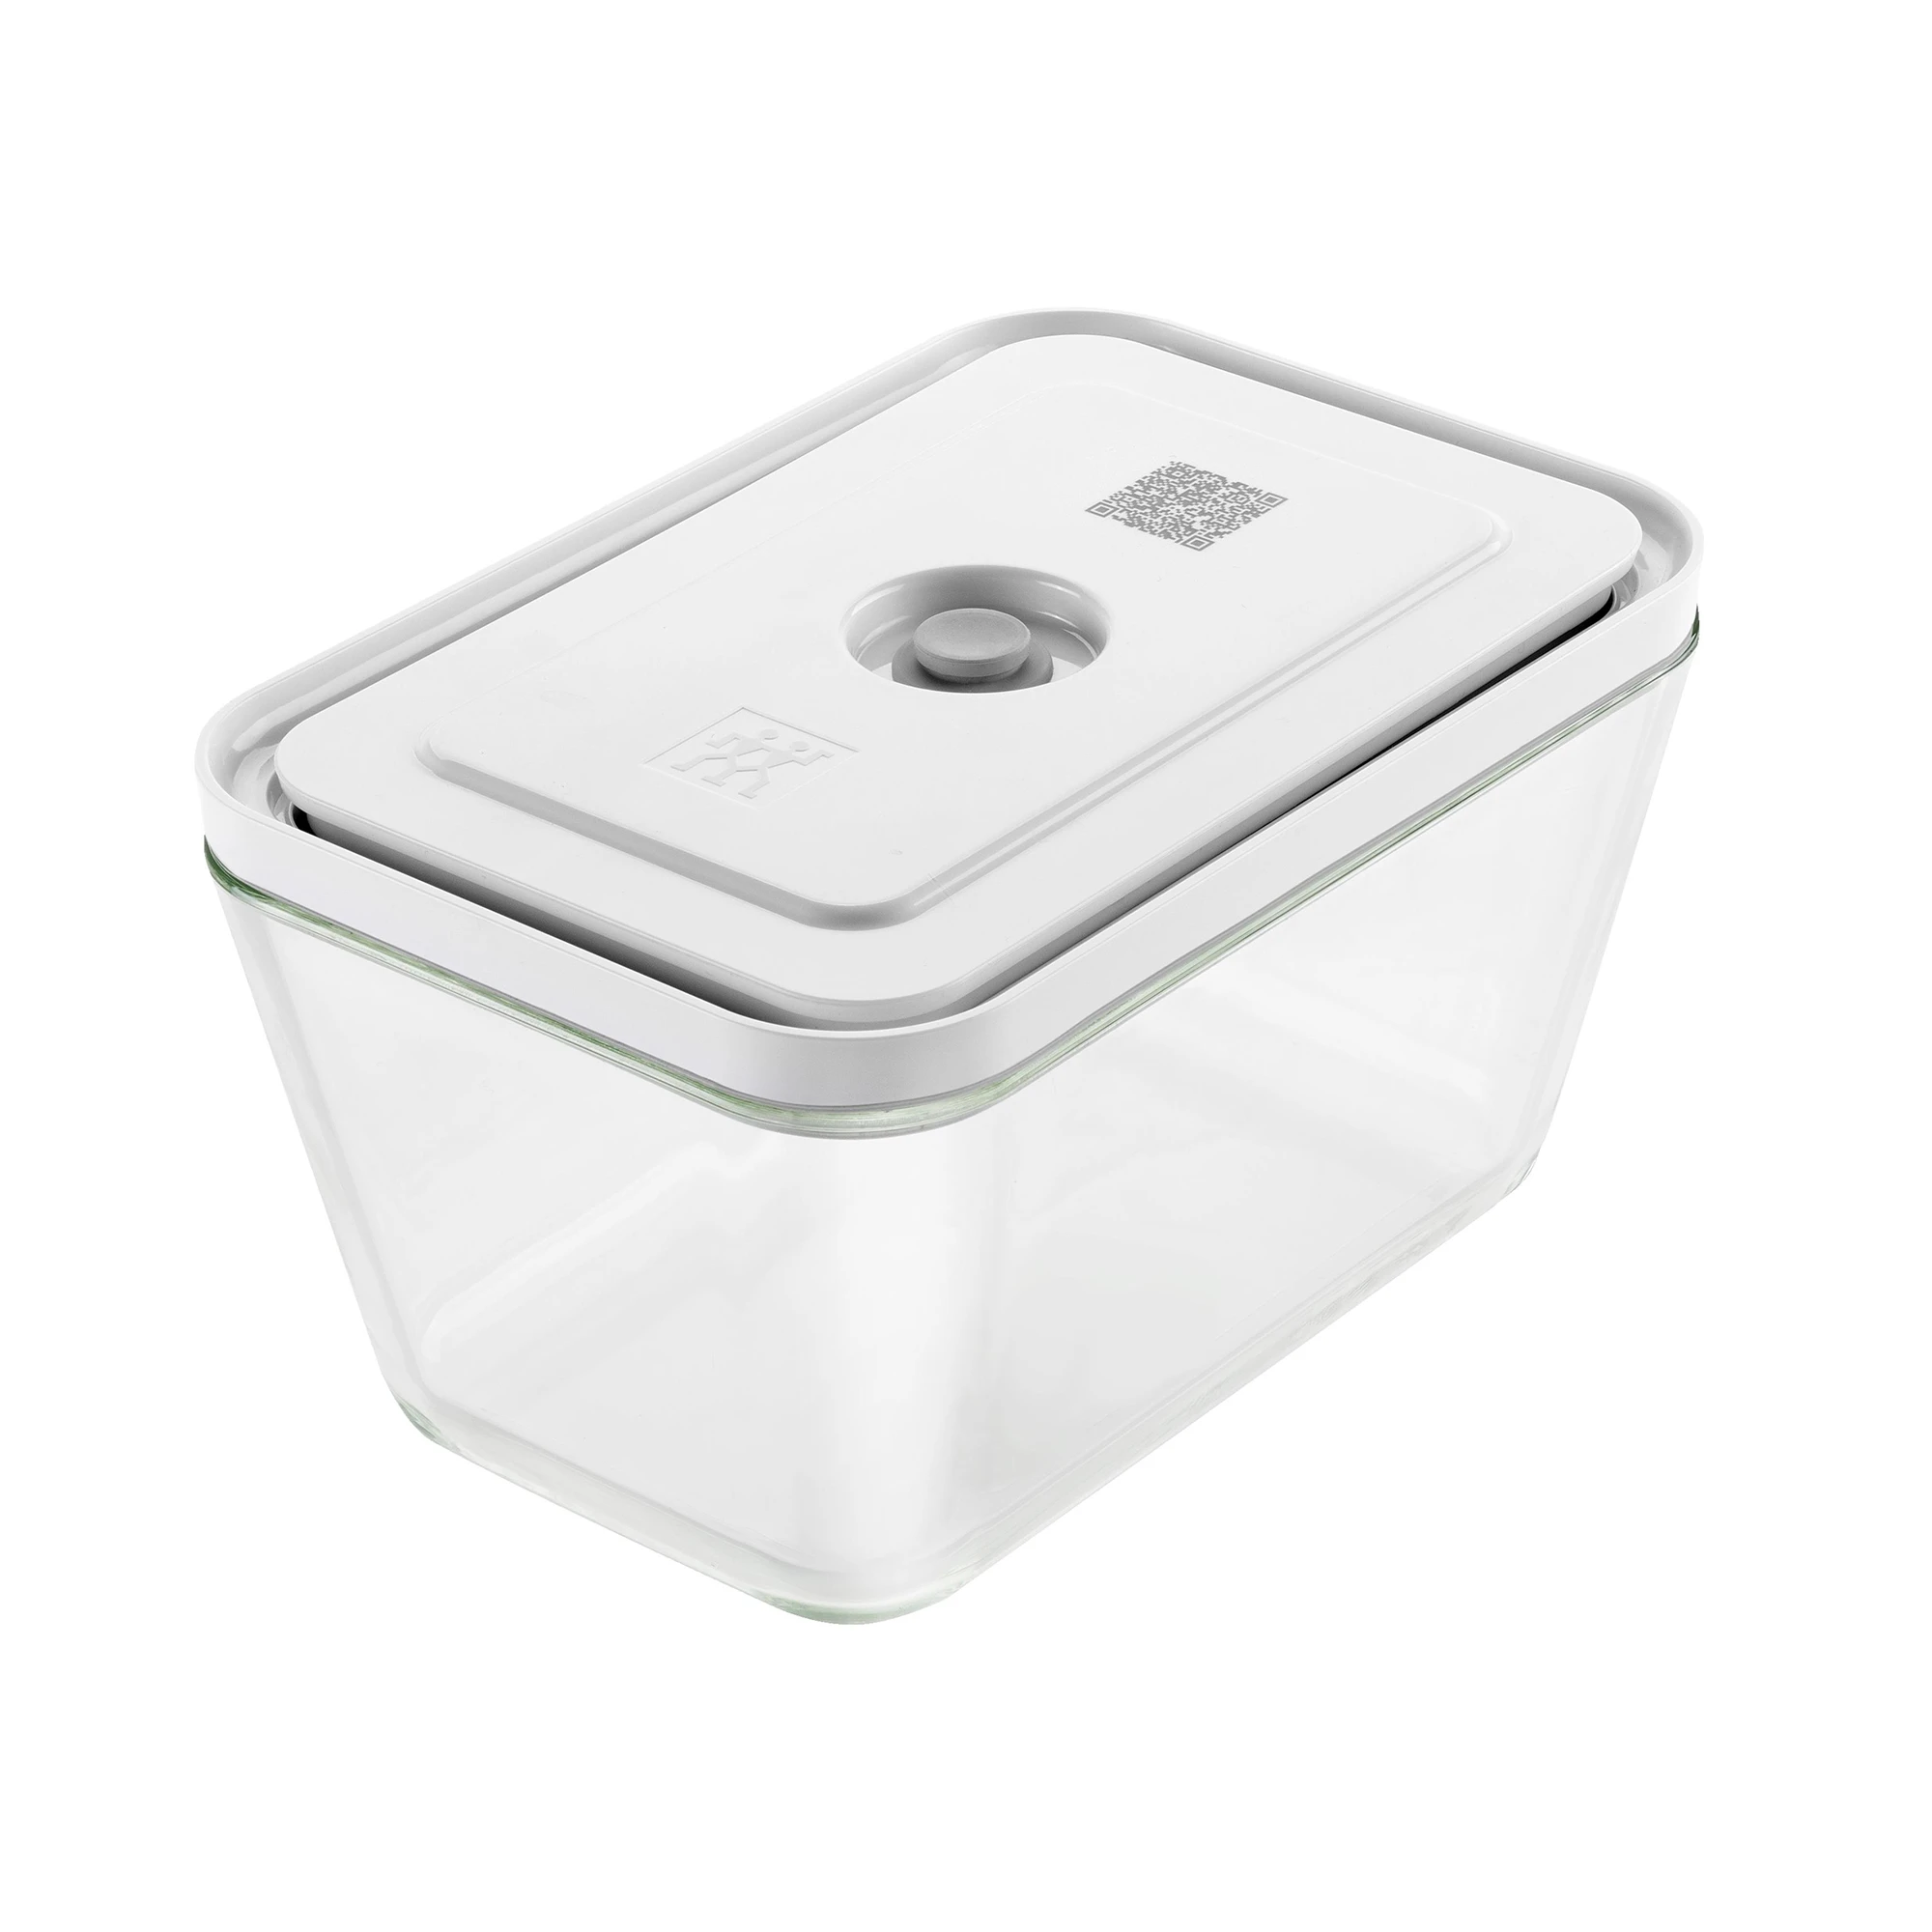 https://www.homethreads.com/files/zwilling/1002497-zwilling-fresh-save-glass-airtight-food-storage-container-meal-prep-container-large-5.webp